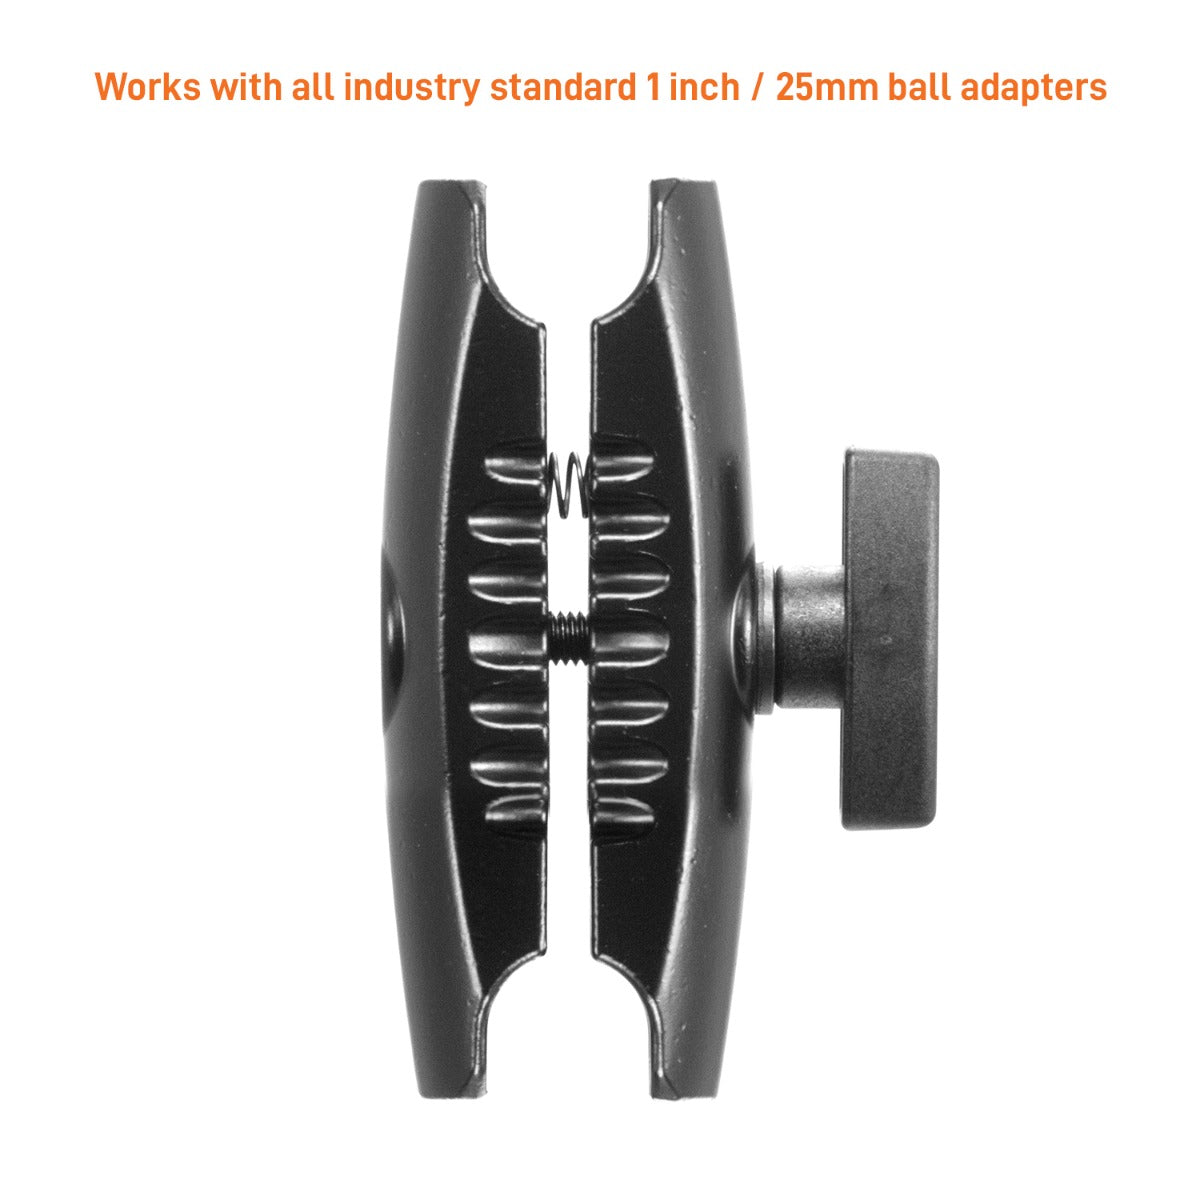 iBOLT™ Aluminum 3.75 inch Double Socket Arm for 1-inch / 25mm / B Size Ball